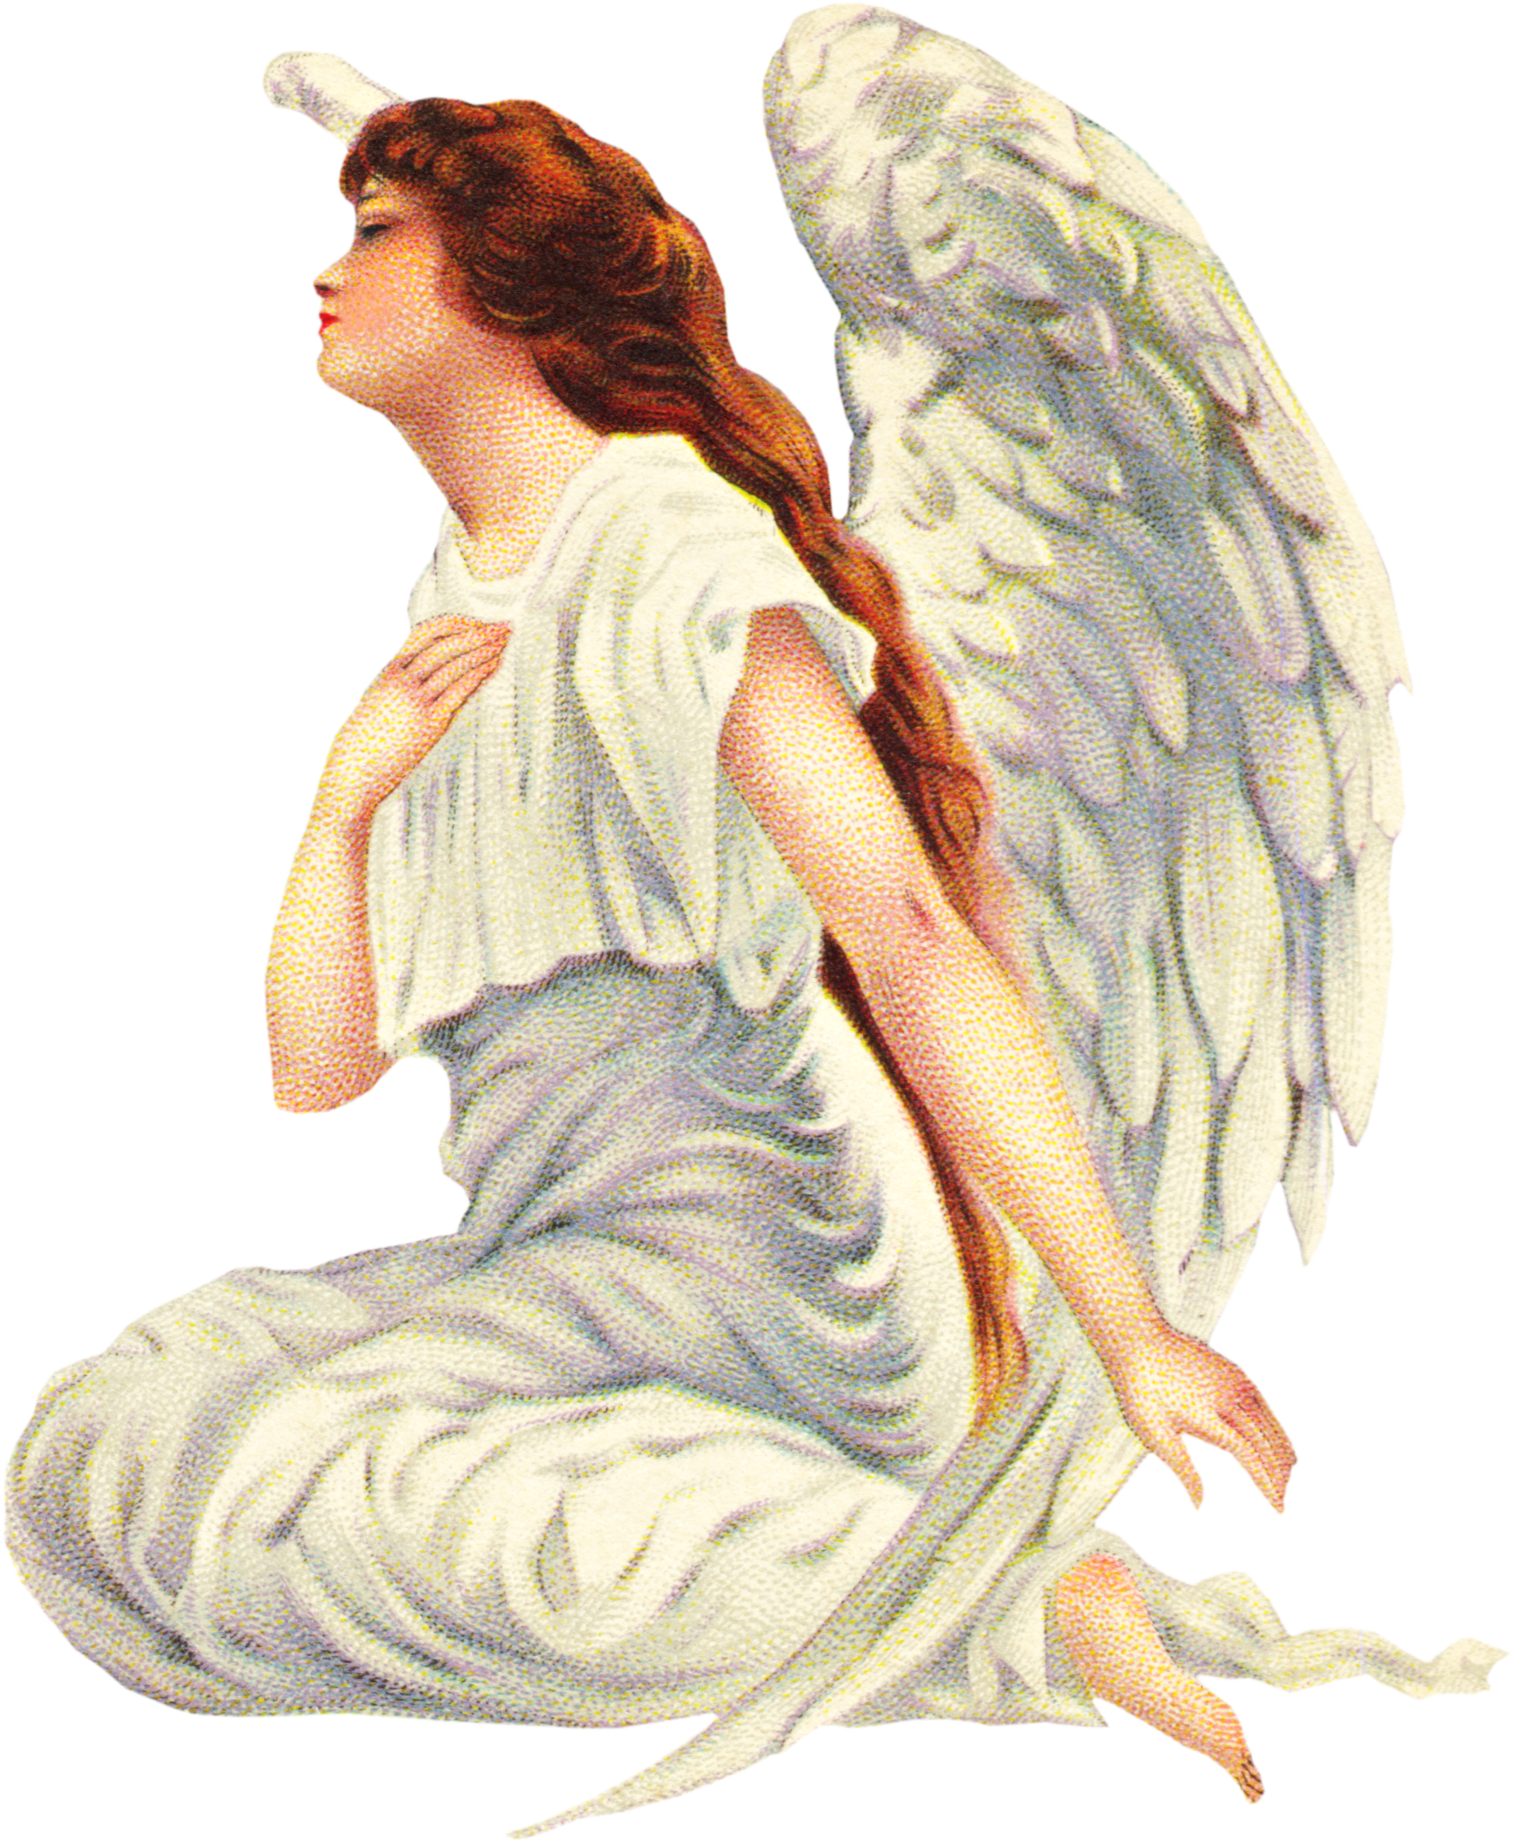 A collection of free Vintage Angel graphics for your design projects.